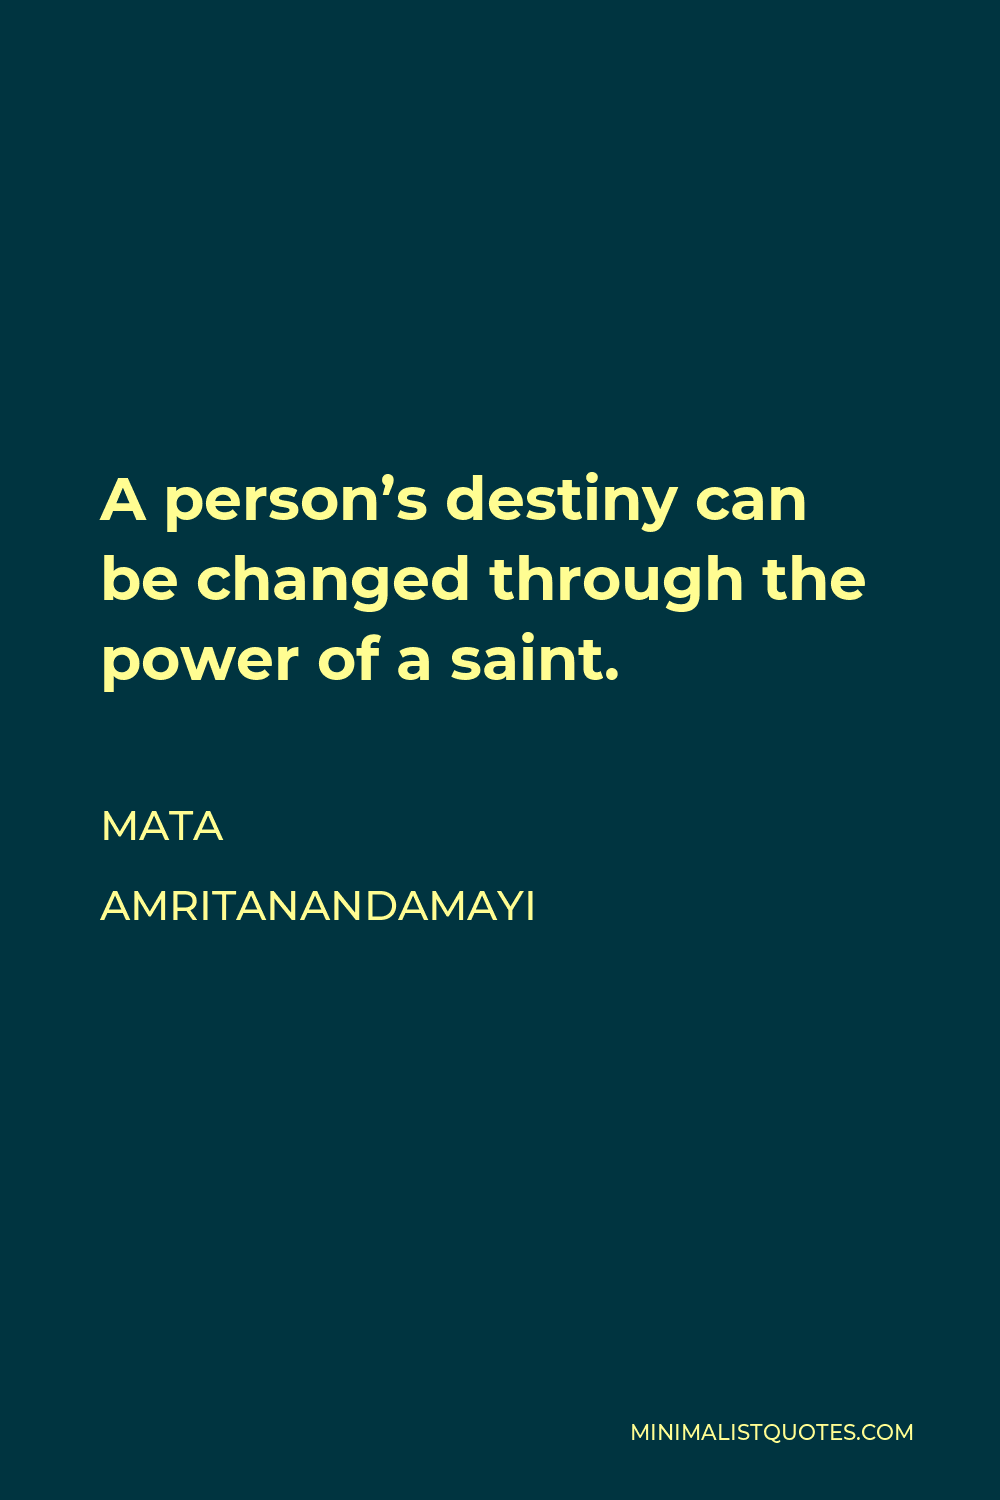 Mata Amritanandamayi Quote - A person’s destiny can be changed through the power of a saint.